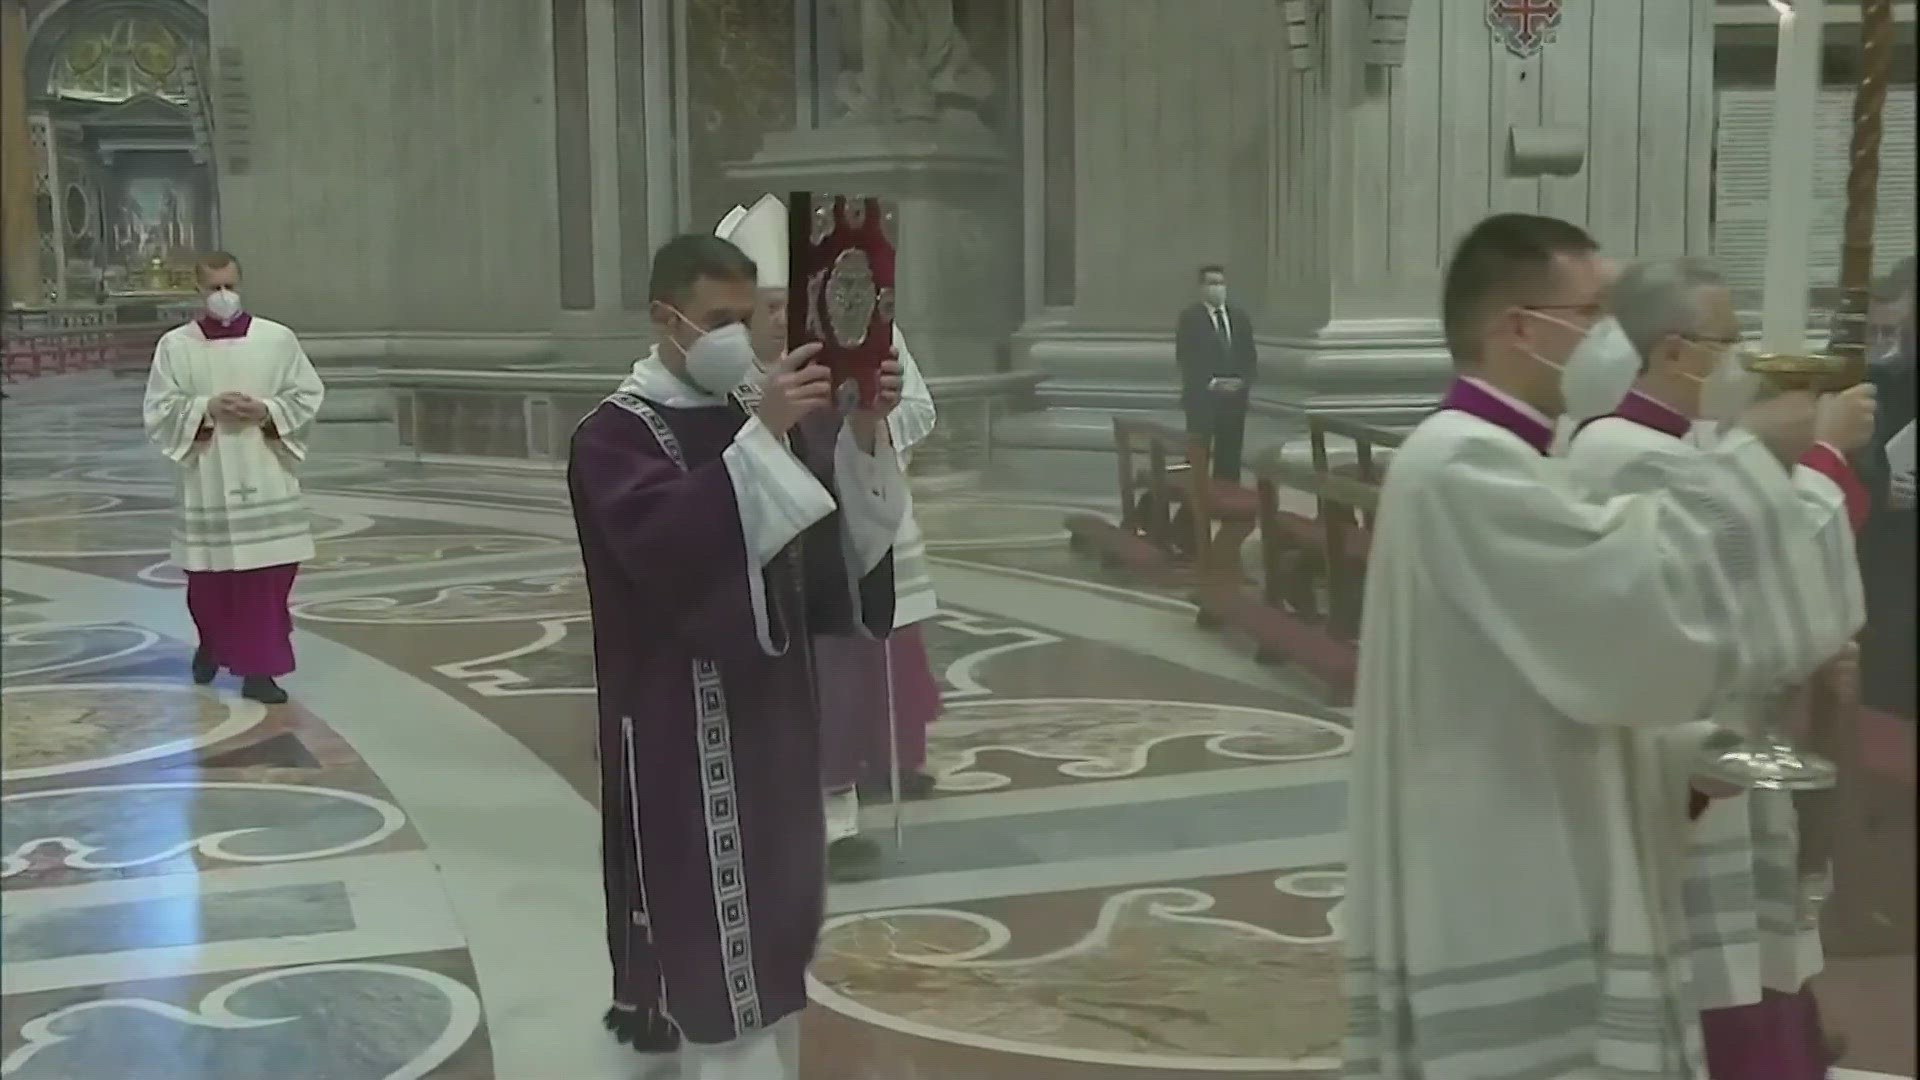 Pope Francis presided over the Vatican's Ash Wednesday ceremony, marking the start of the Catholic Church's Lent season in St Peter's Basilica.